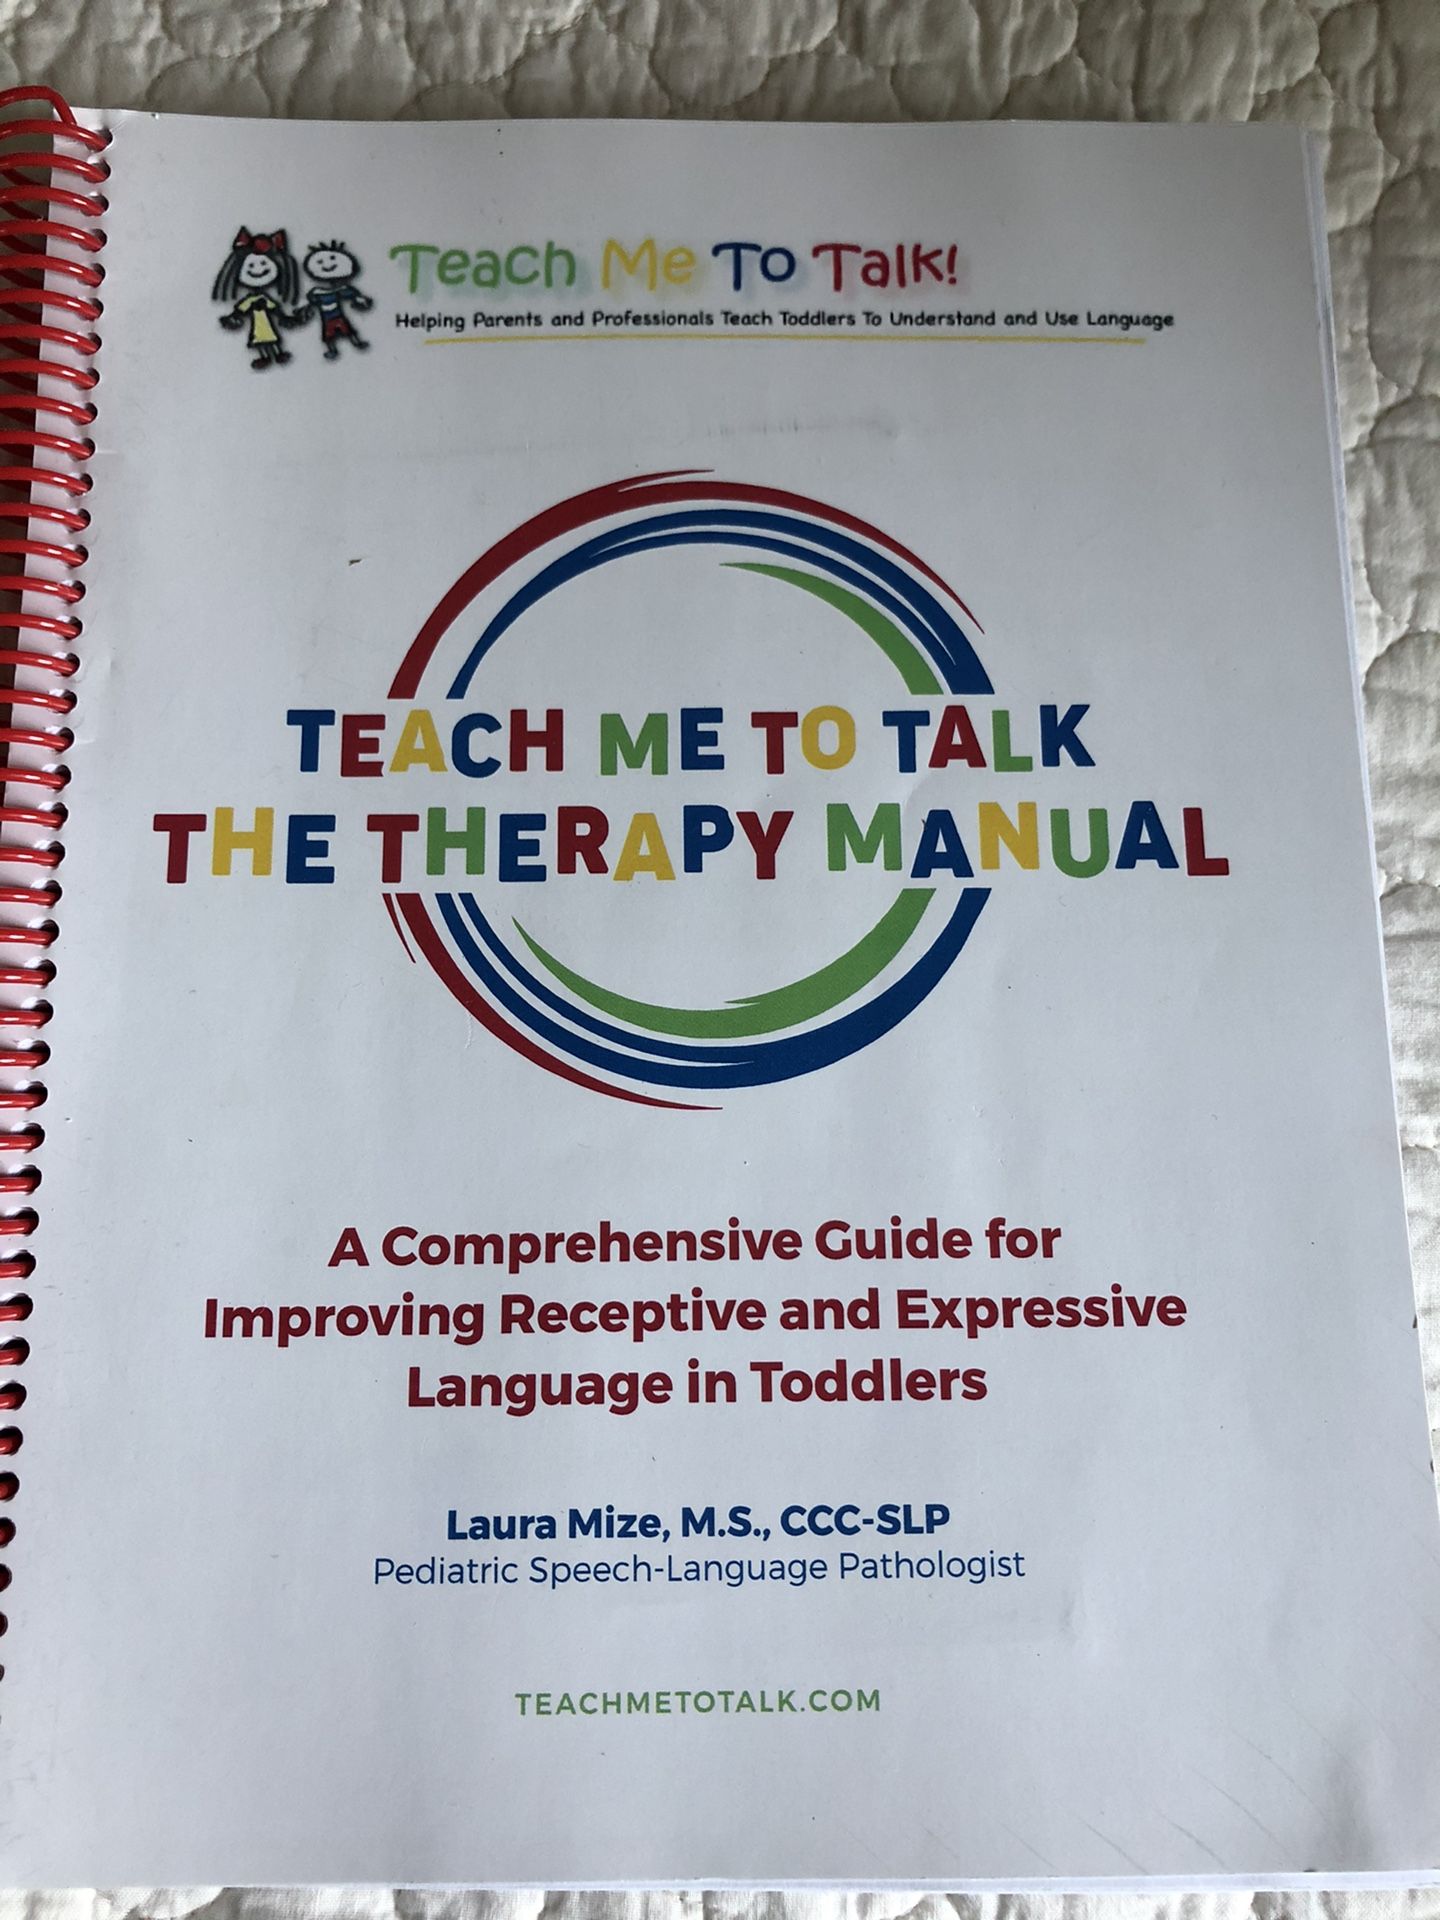 Teach Me To Talk Therapy Manuals and DVD’s